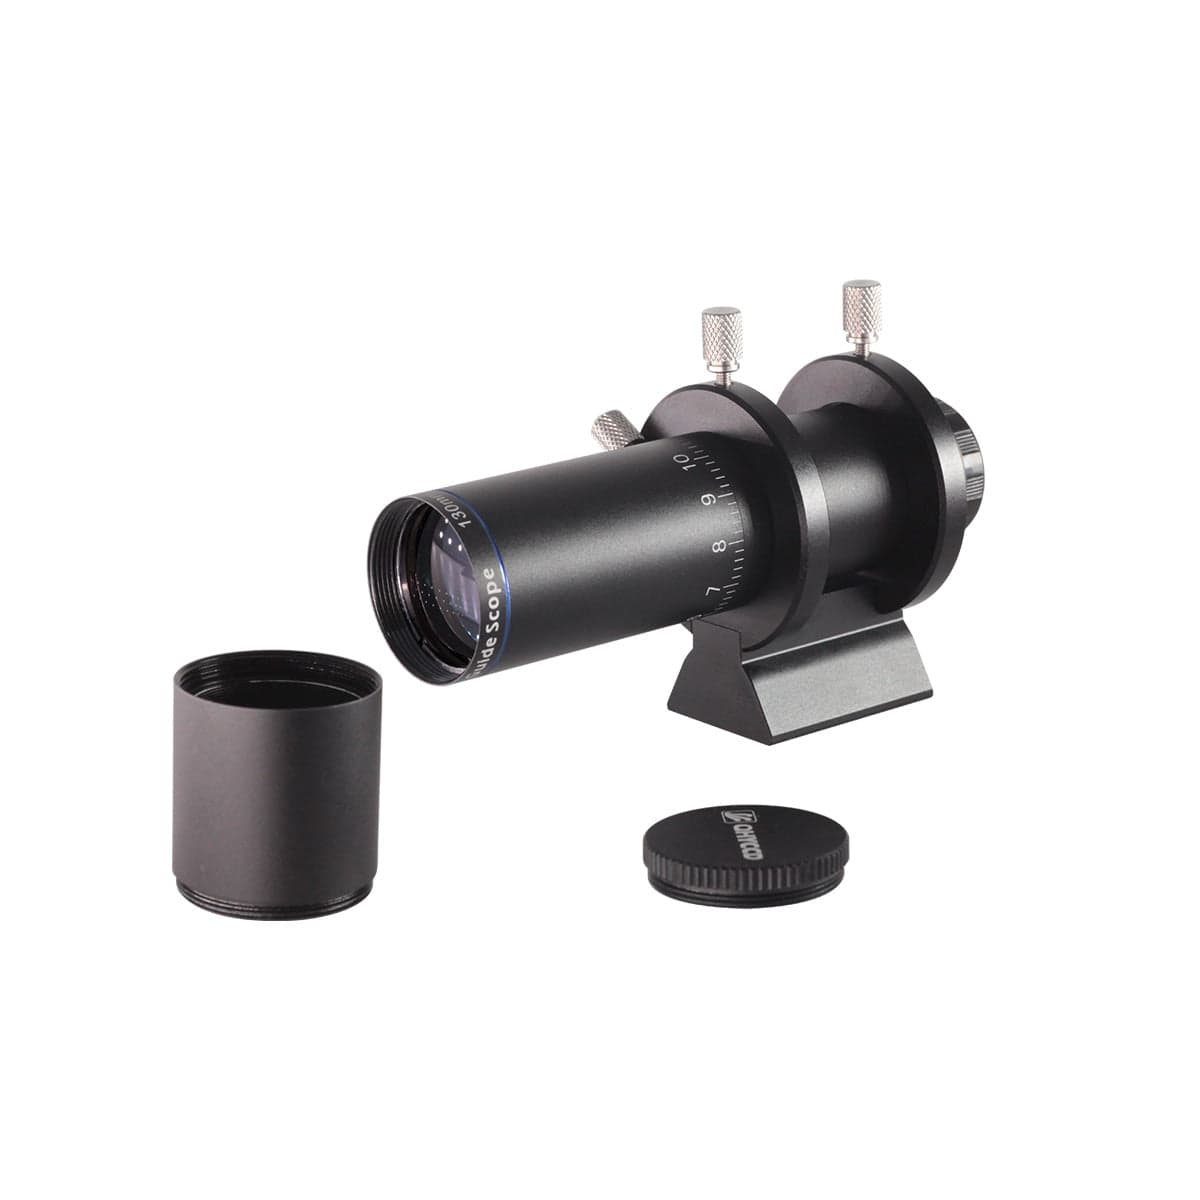 QHYCCD Guide Scope QHYCCD 30mm f/4.3 Telescope MiniGuideScope With Mount